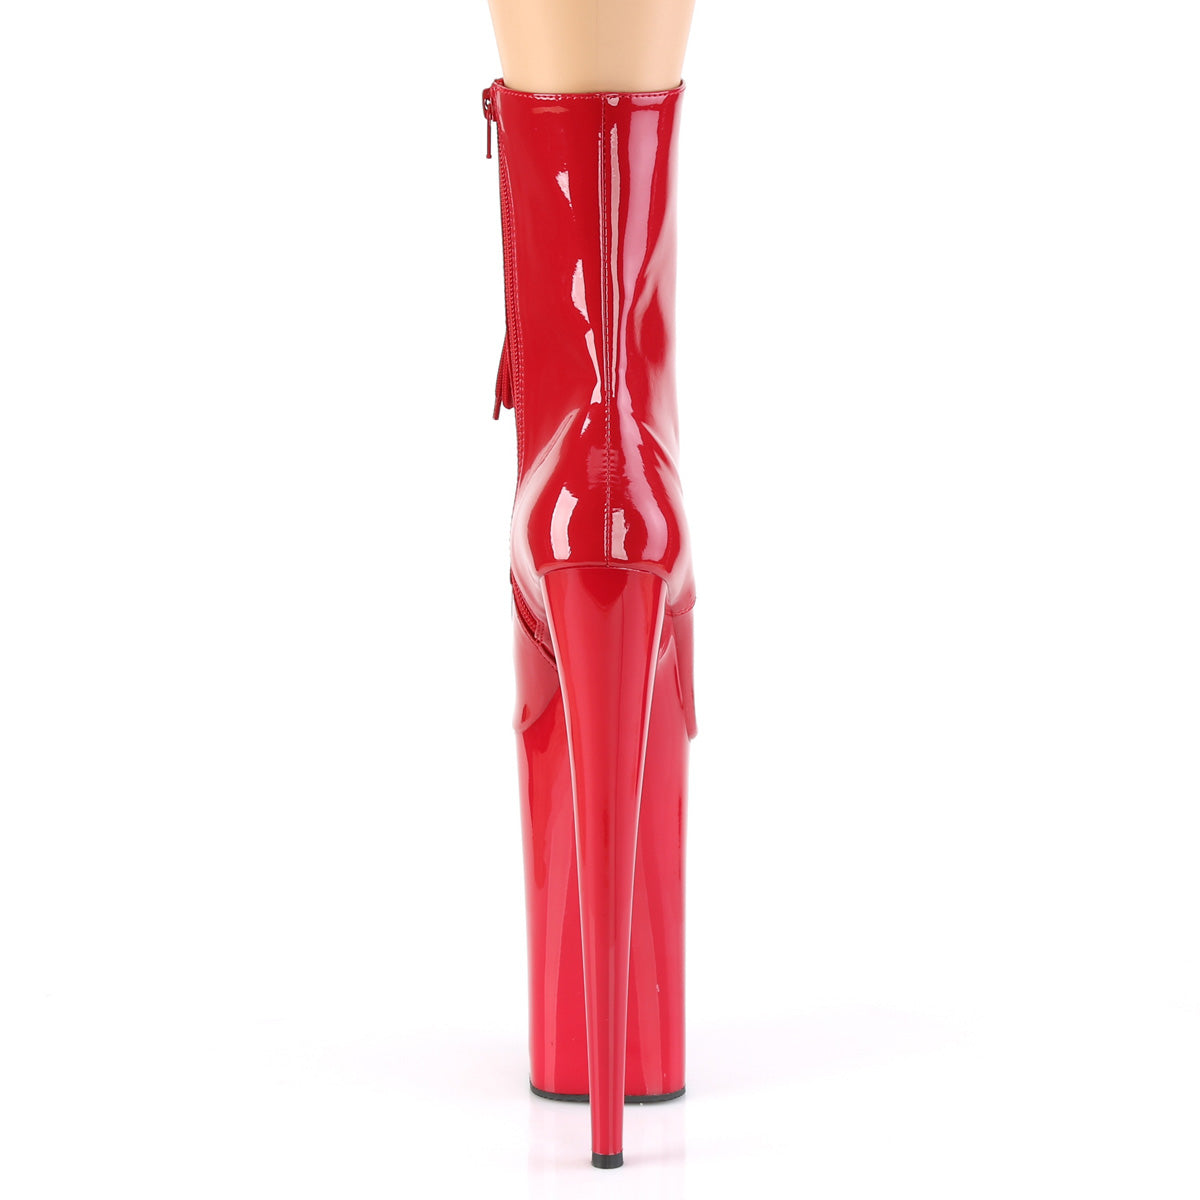 BEYOND-1020 Pleasers Sexy 10" Heel Red Pole Dancing Platform-Pleaser- Sexy Shoes Fetish Footwear